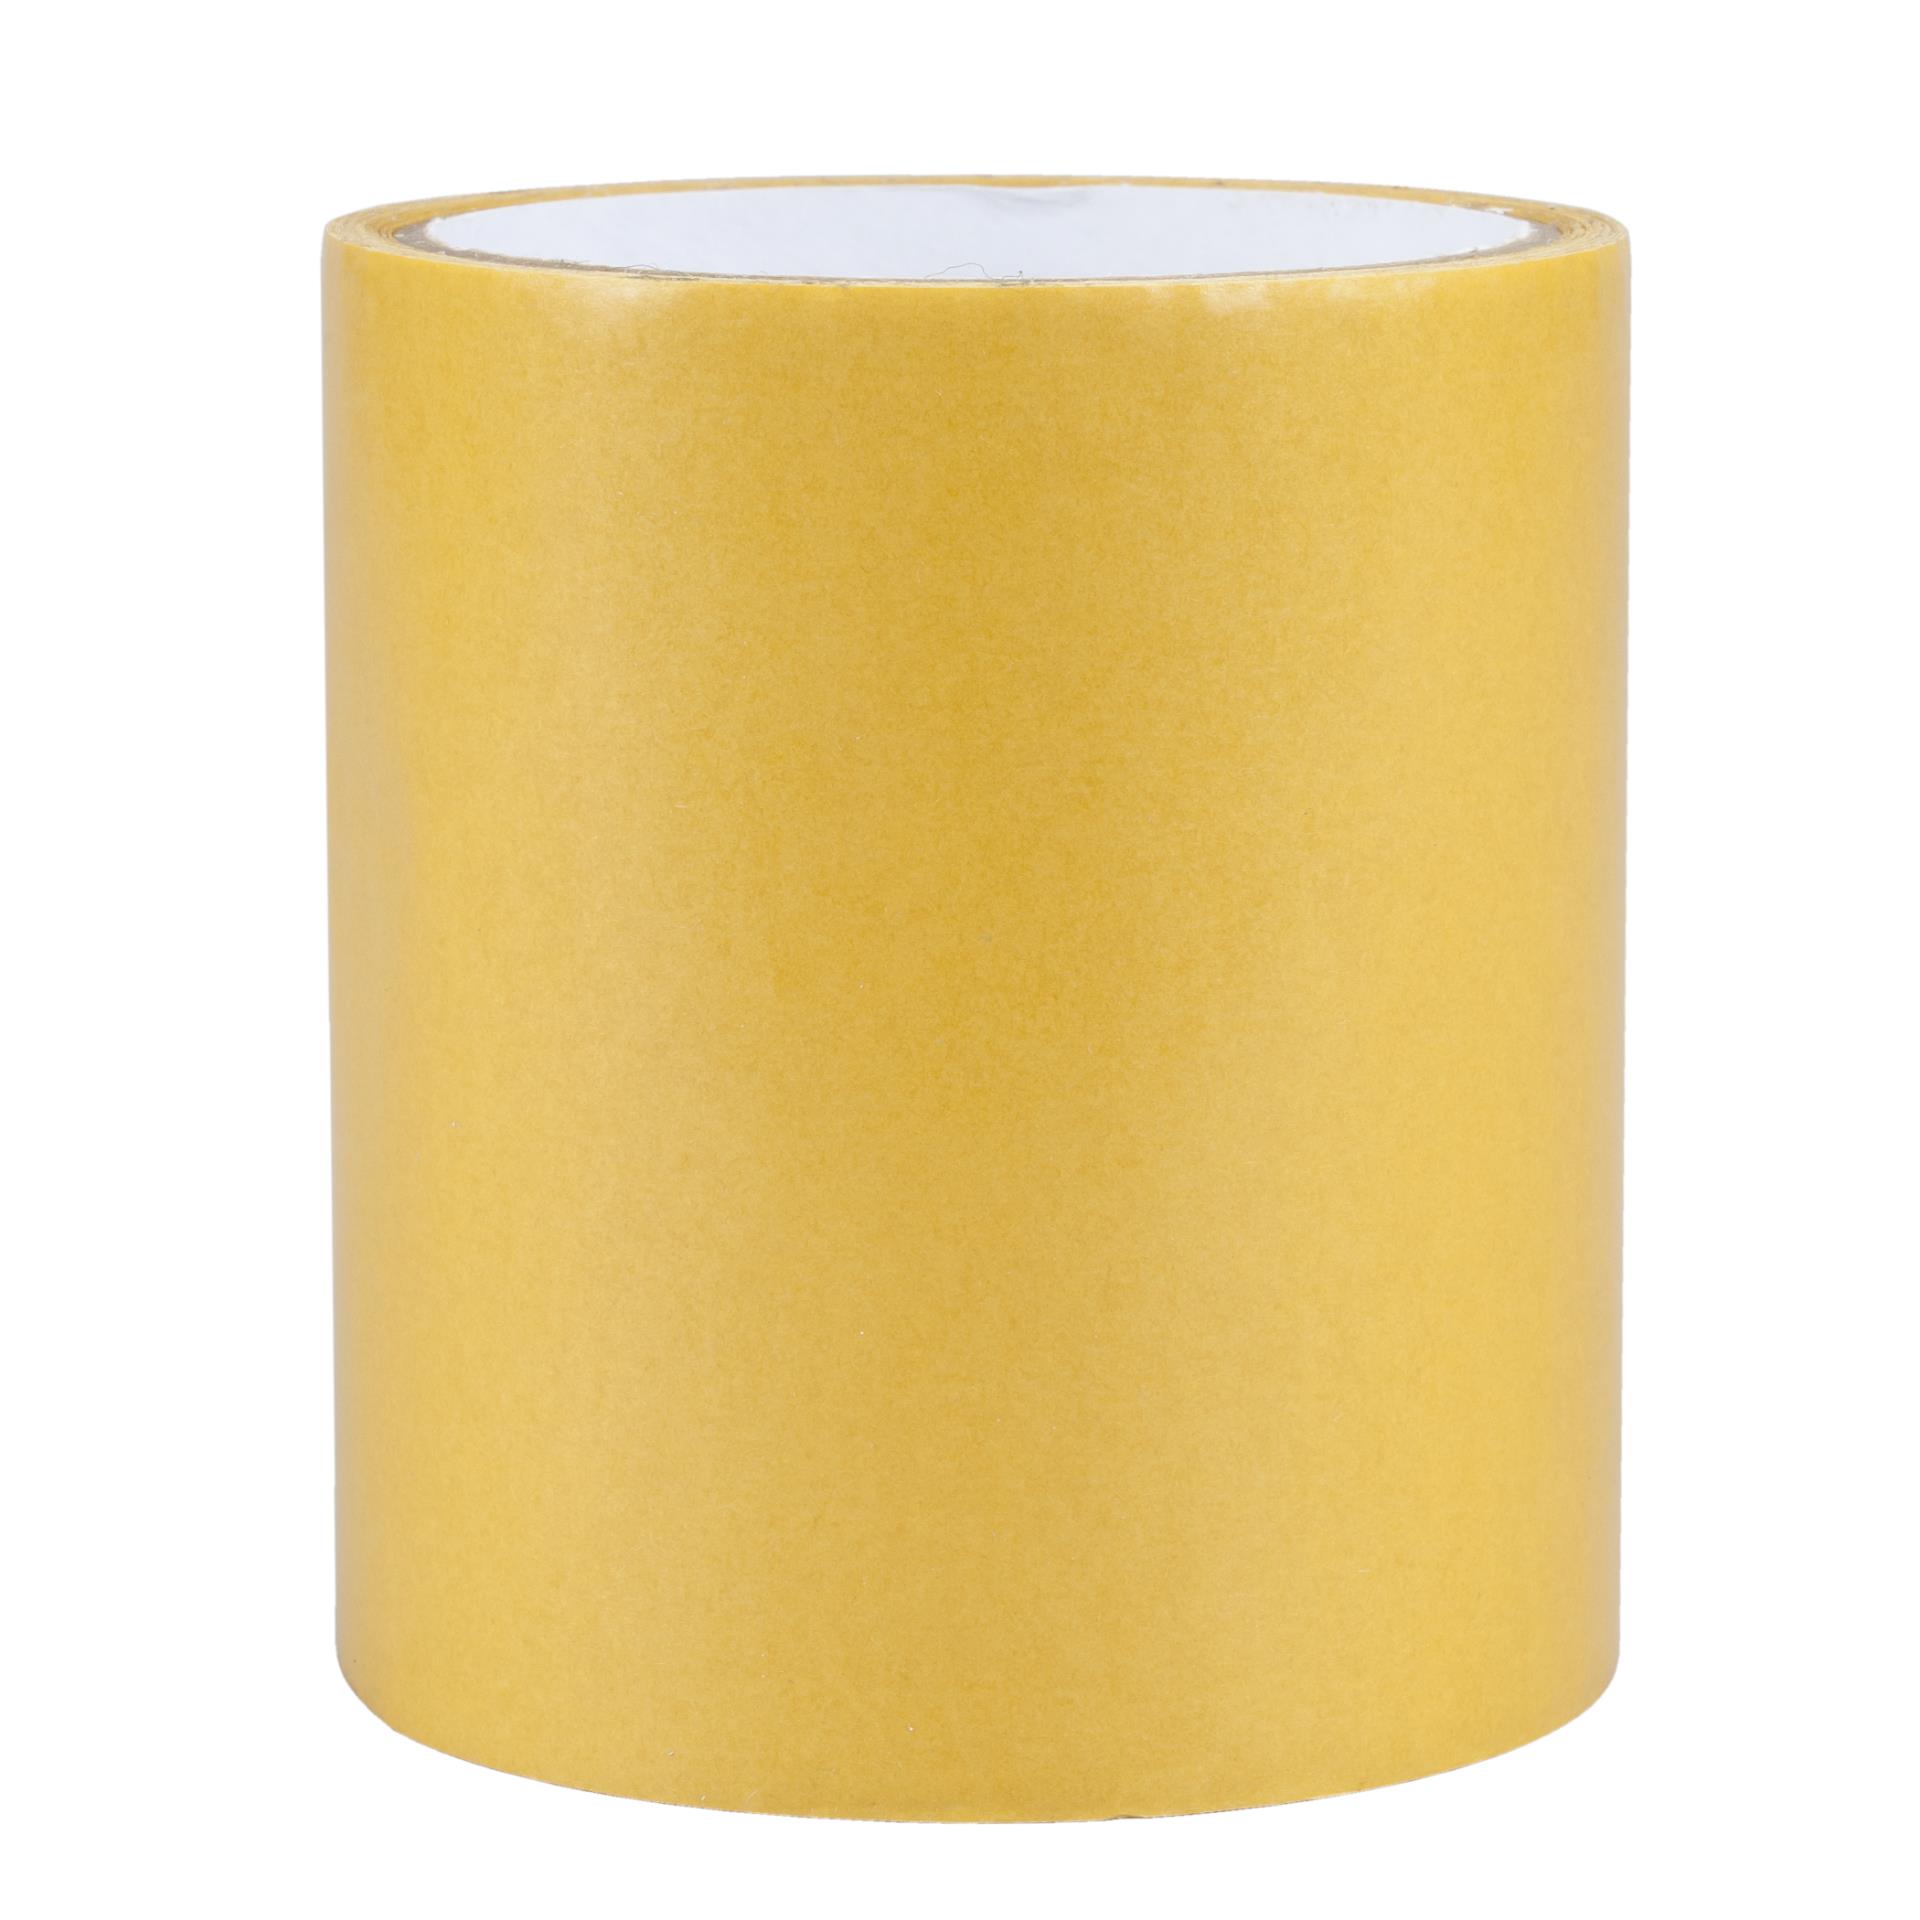 00051125658737 3M™ Scrim Reinforced Adhesive Transfer Tape 97053, Clear,  54 in x 250 yd, 2.5 mil, roll per pallet Aircraft products adhesive-transfer-tapes  6299693